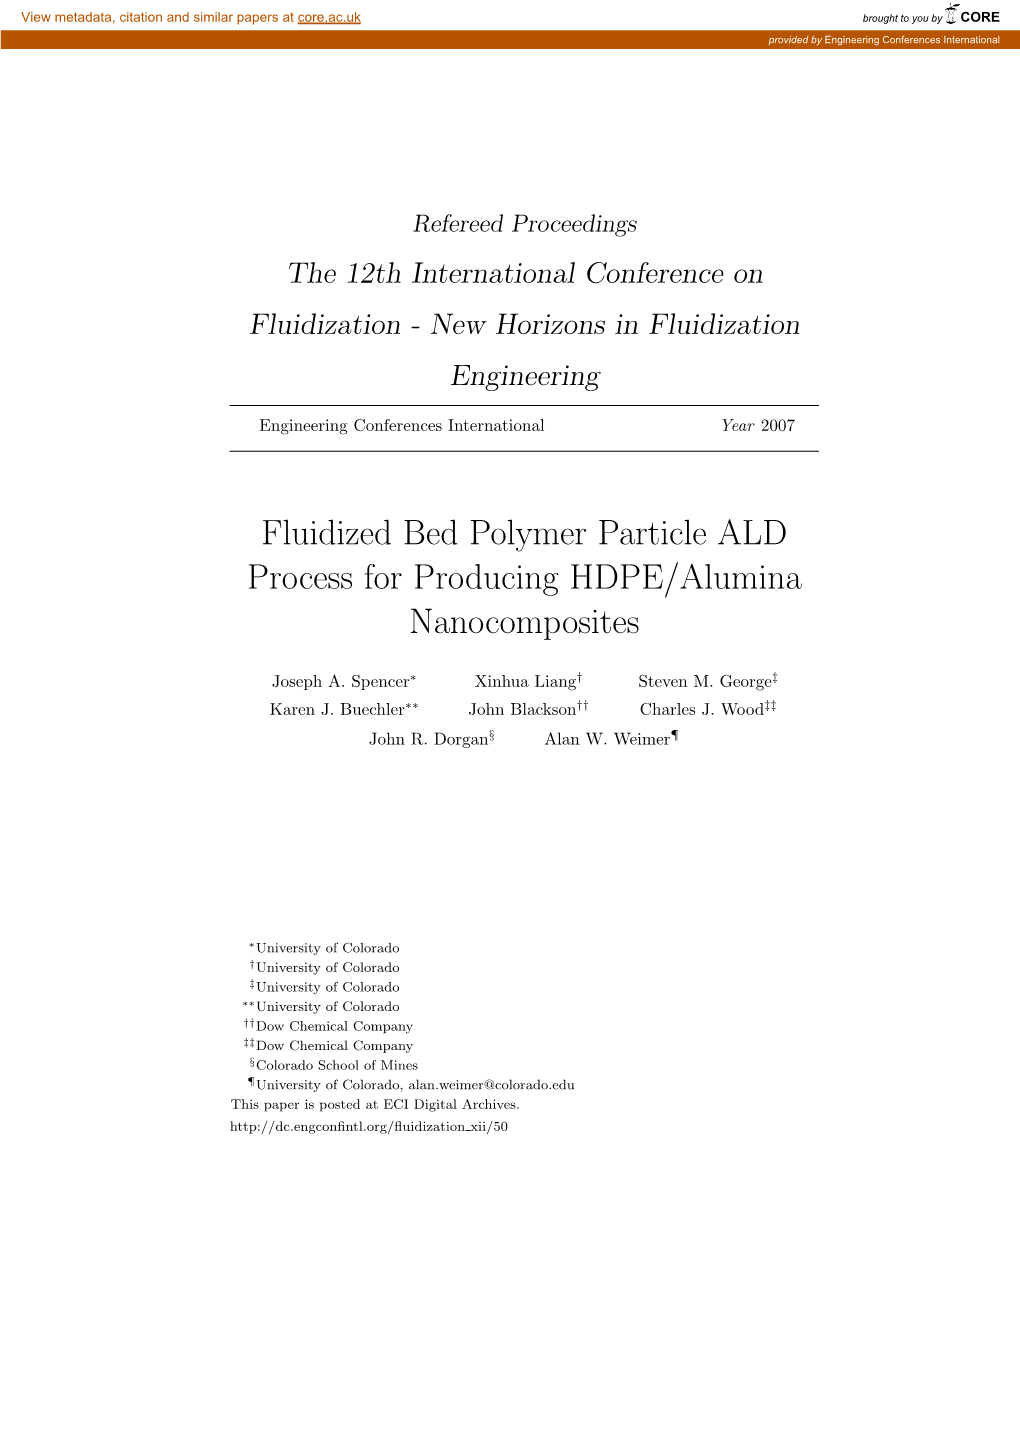 Fluidized Bed Polymer Particle ALD Process for Producing HDPE/Alumina Nanocomposites